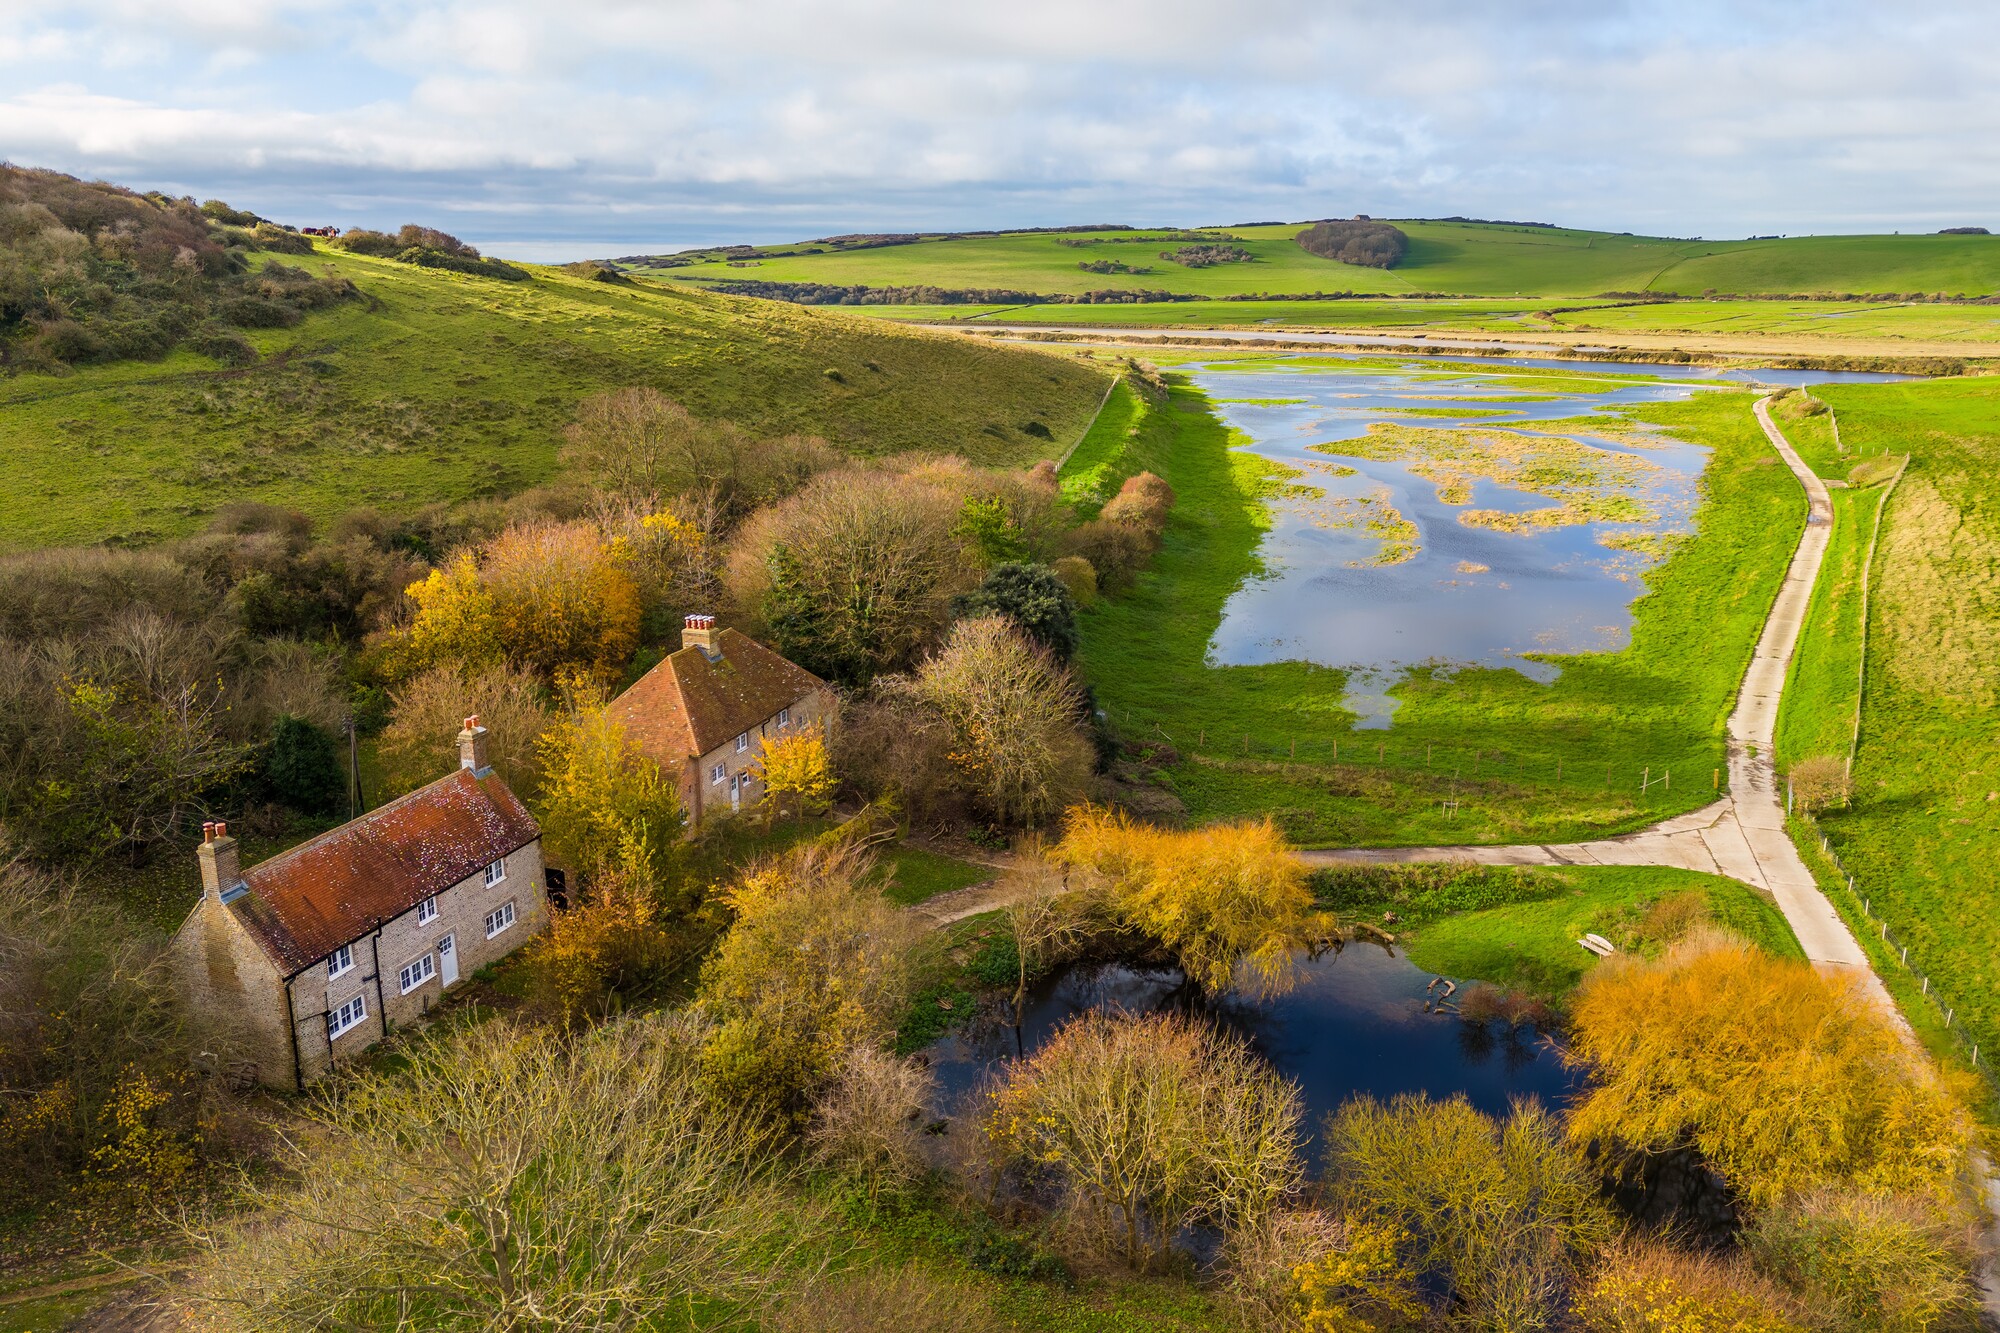 Renovations at iconic coastal site in South Downs National Park are unveiled image